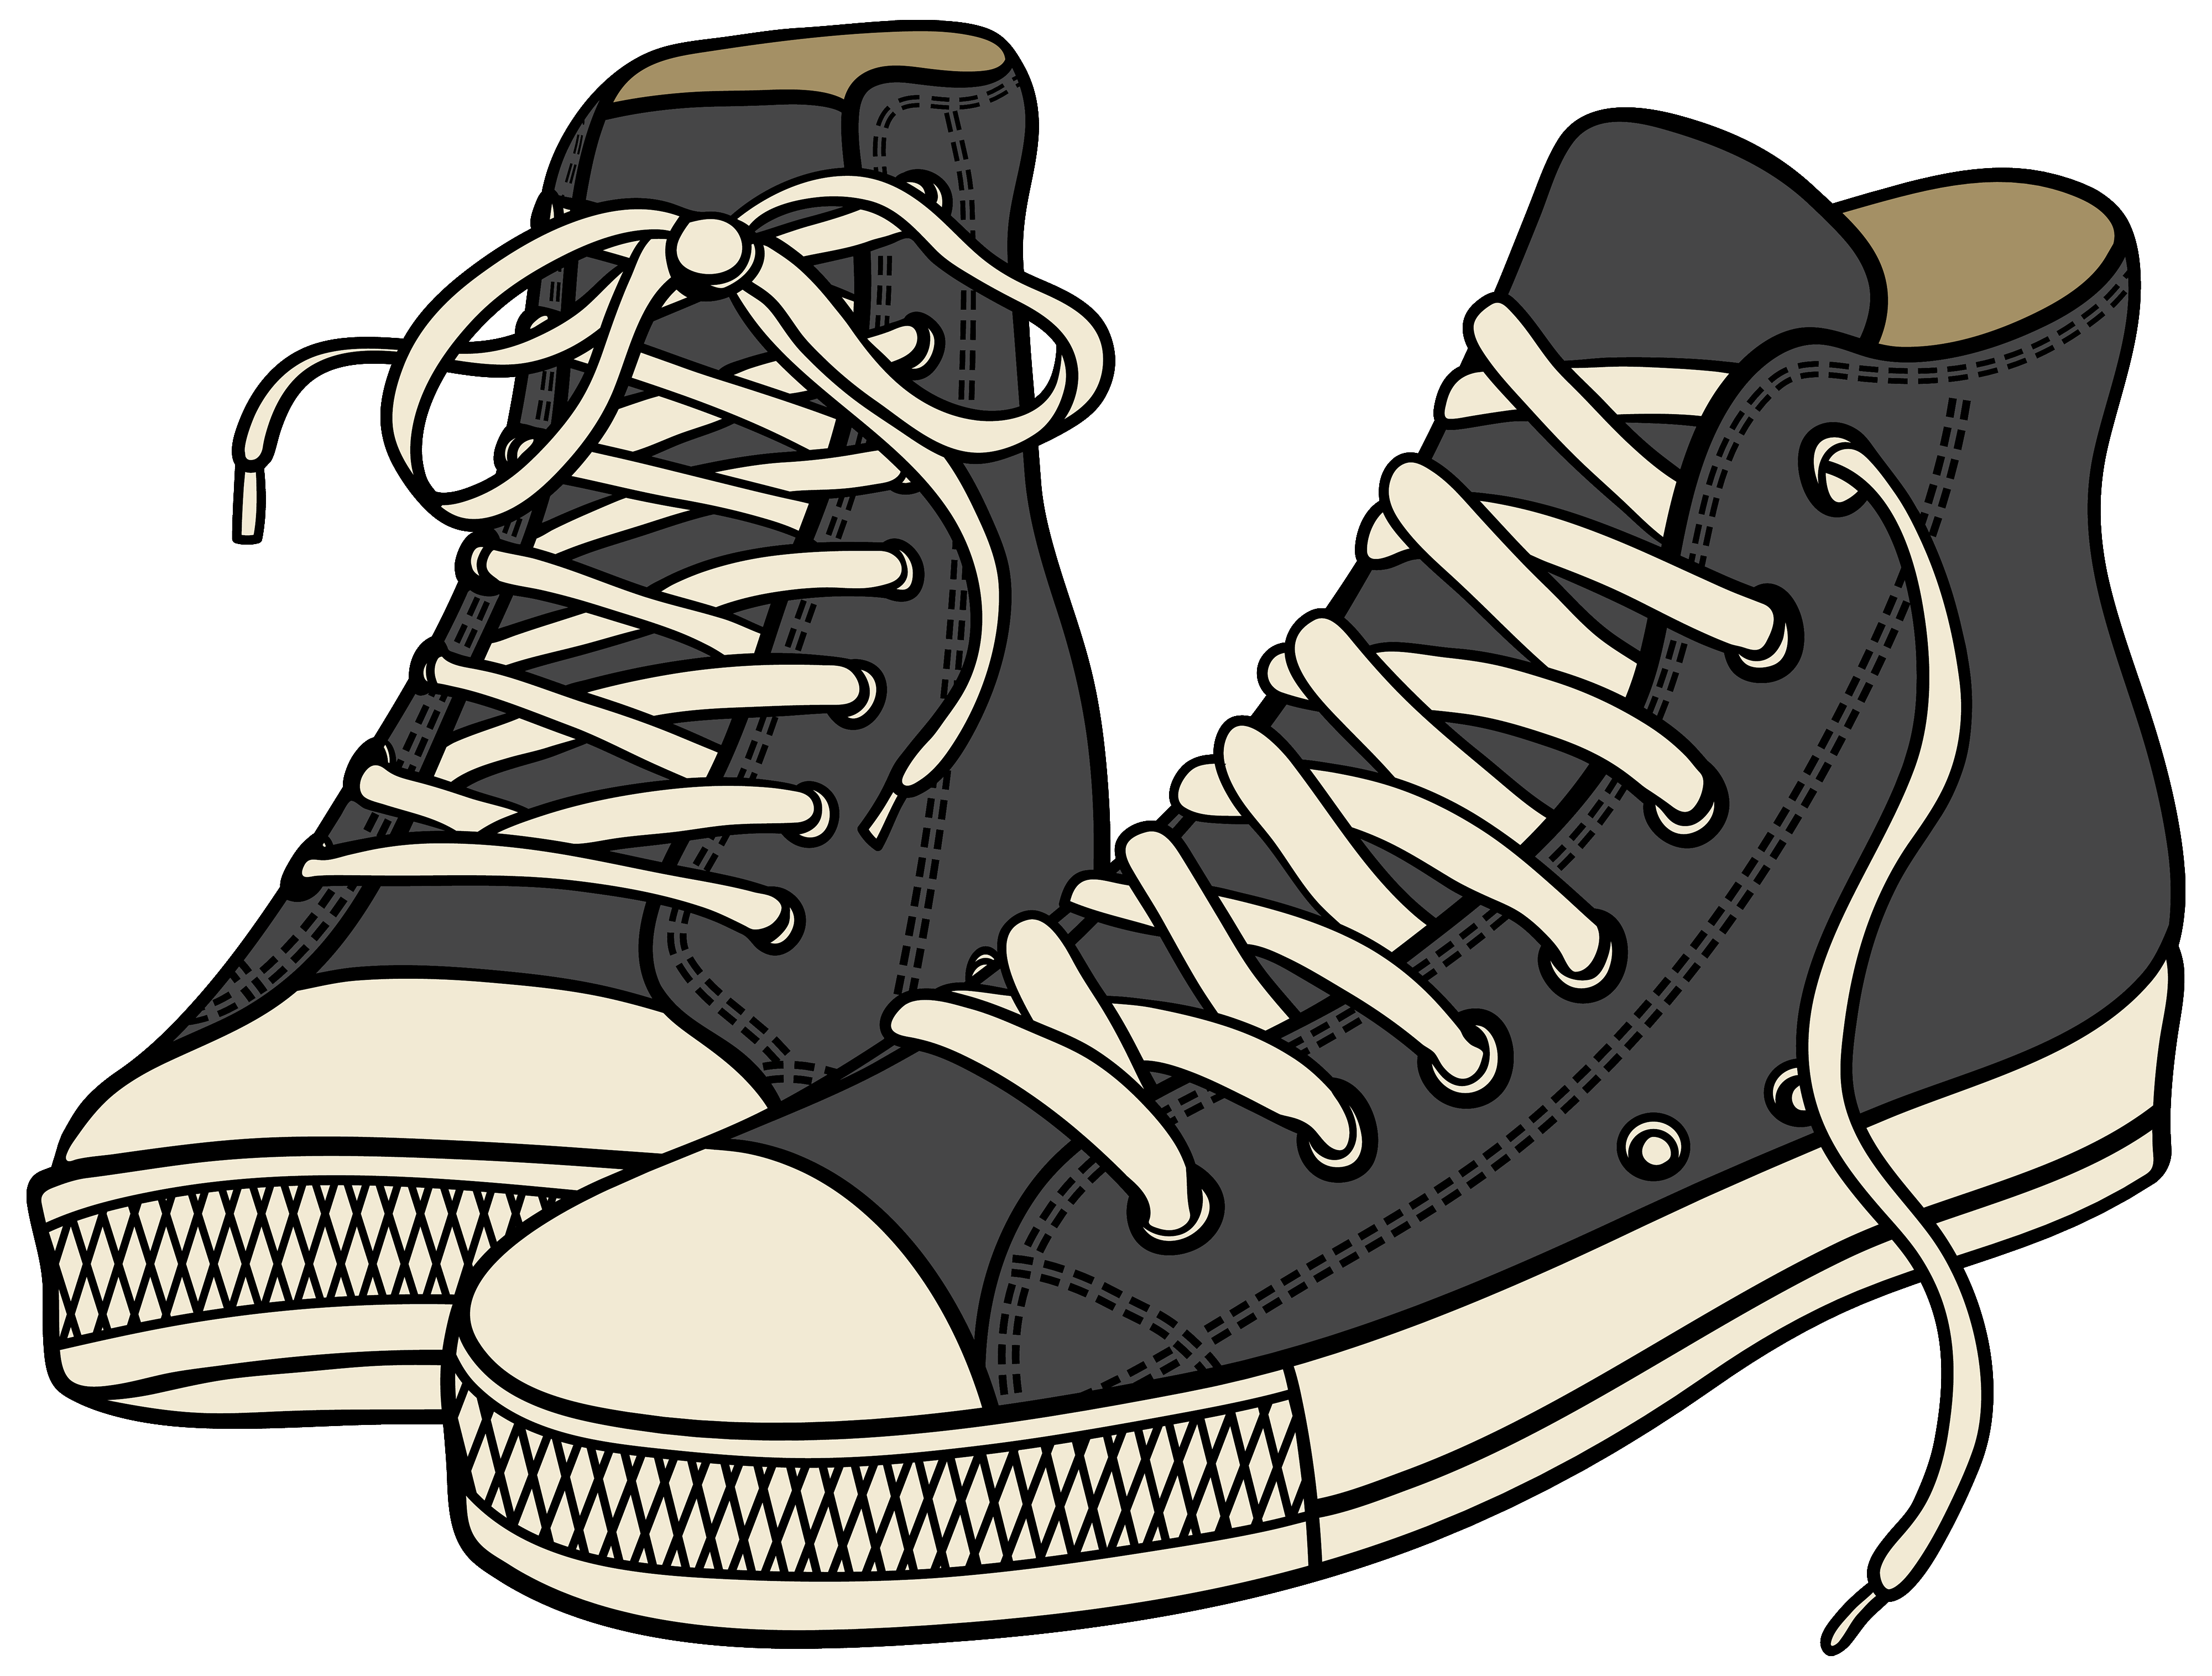 Pile of shoes clipart images gallery for free download.